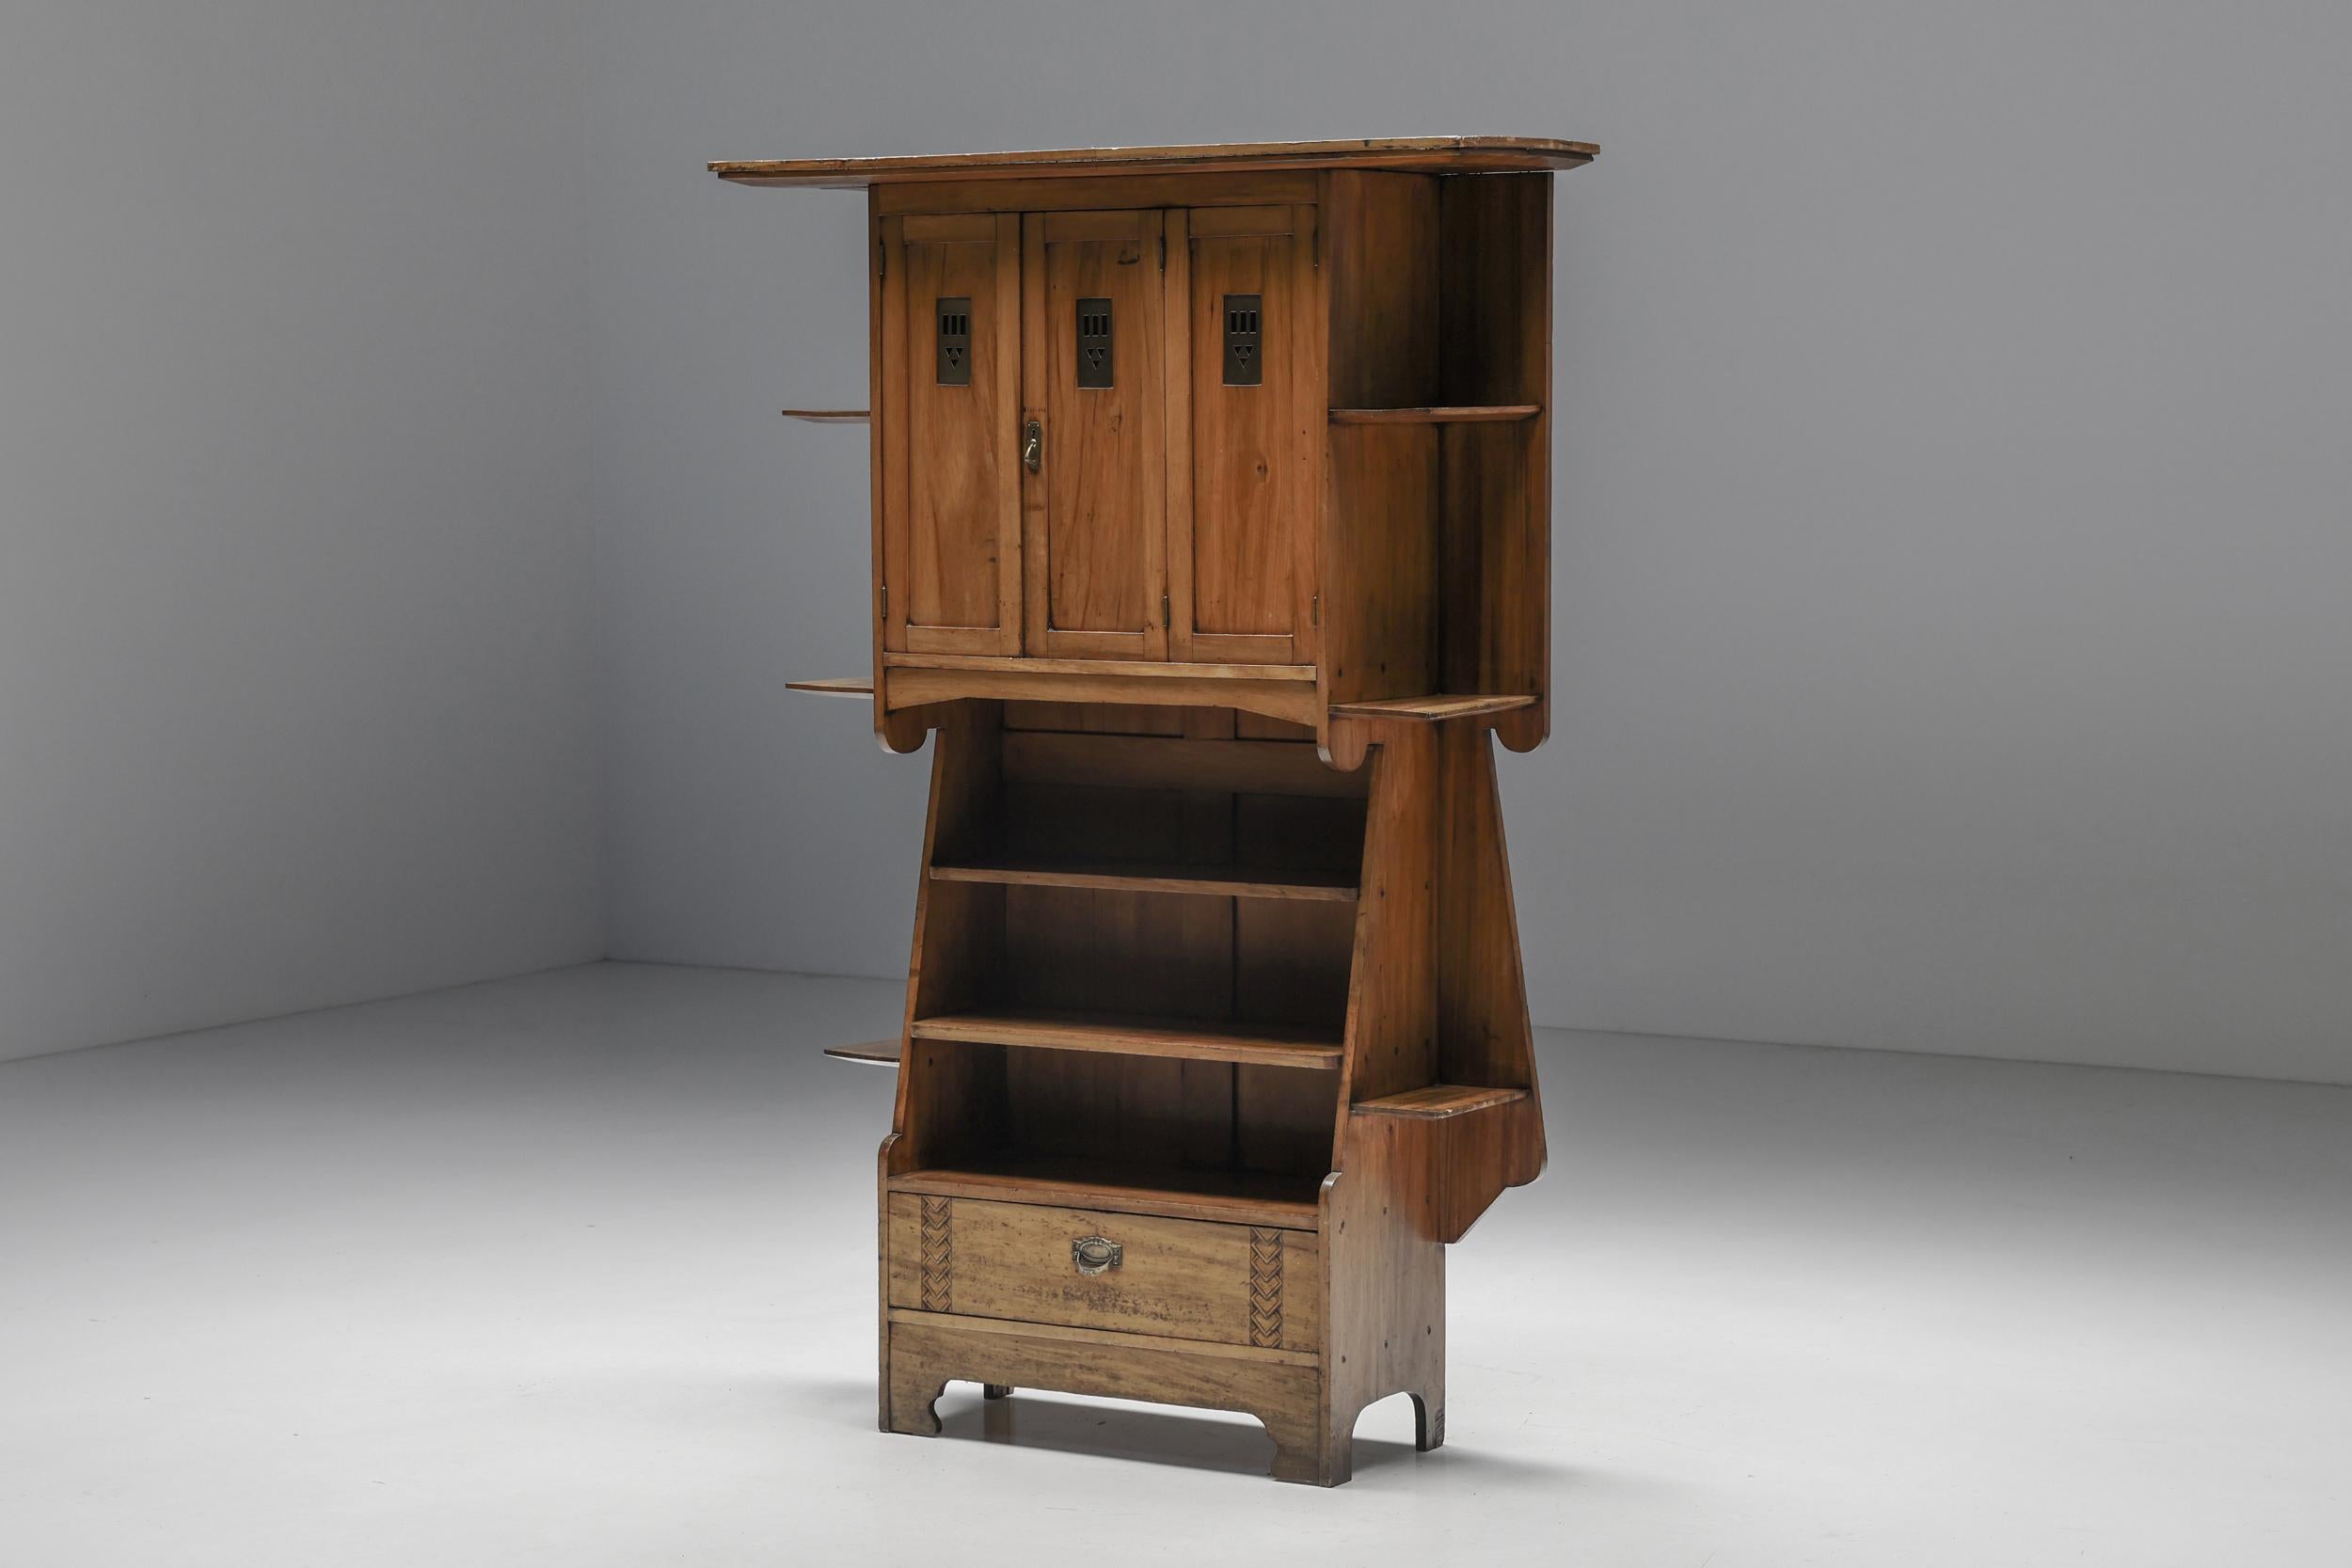 Arts & Crafts; Cupboard; Charles Rennie Mackintosh; 20th Century; Wood; Cabinet; Shelves; Mid-Century Modern; Scotland; Scottish Design; Craftsmanship; Architect; Modernism; Art Nouveau; 

This remarkably well-crafted wooden cupboard is created by